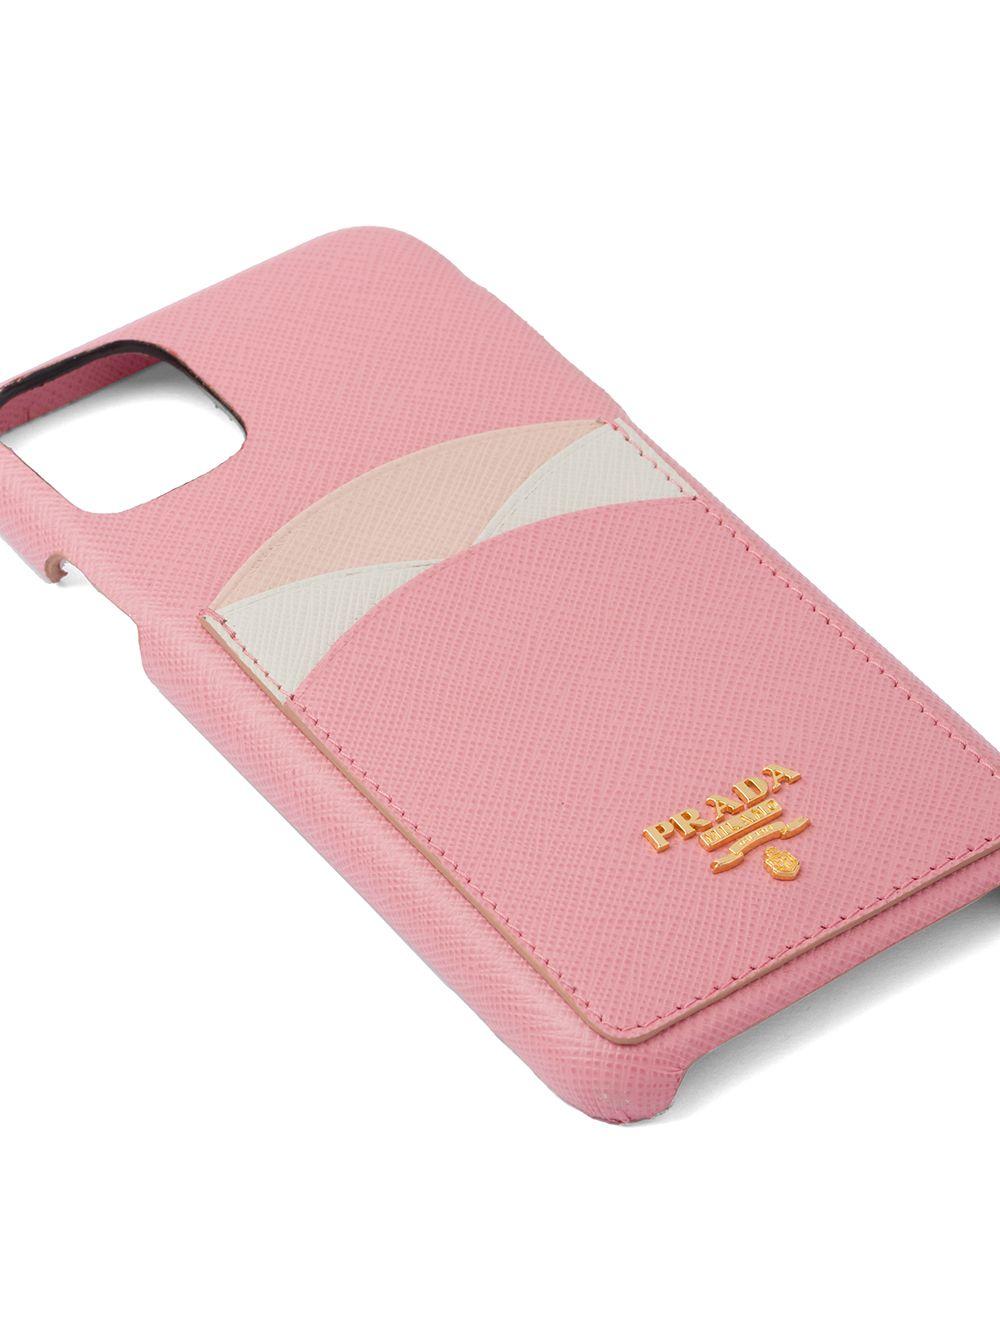 Prada Leather Colour-block Iphone 11 Pro Max Case in Pink - Lyst